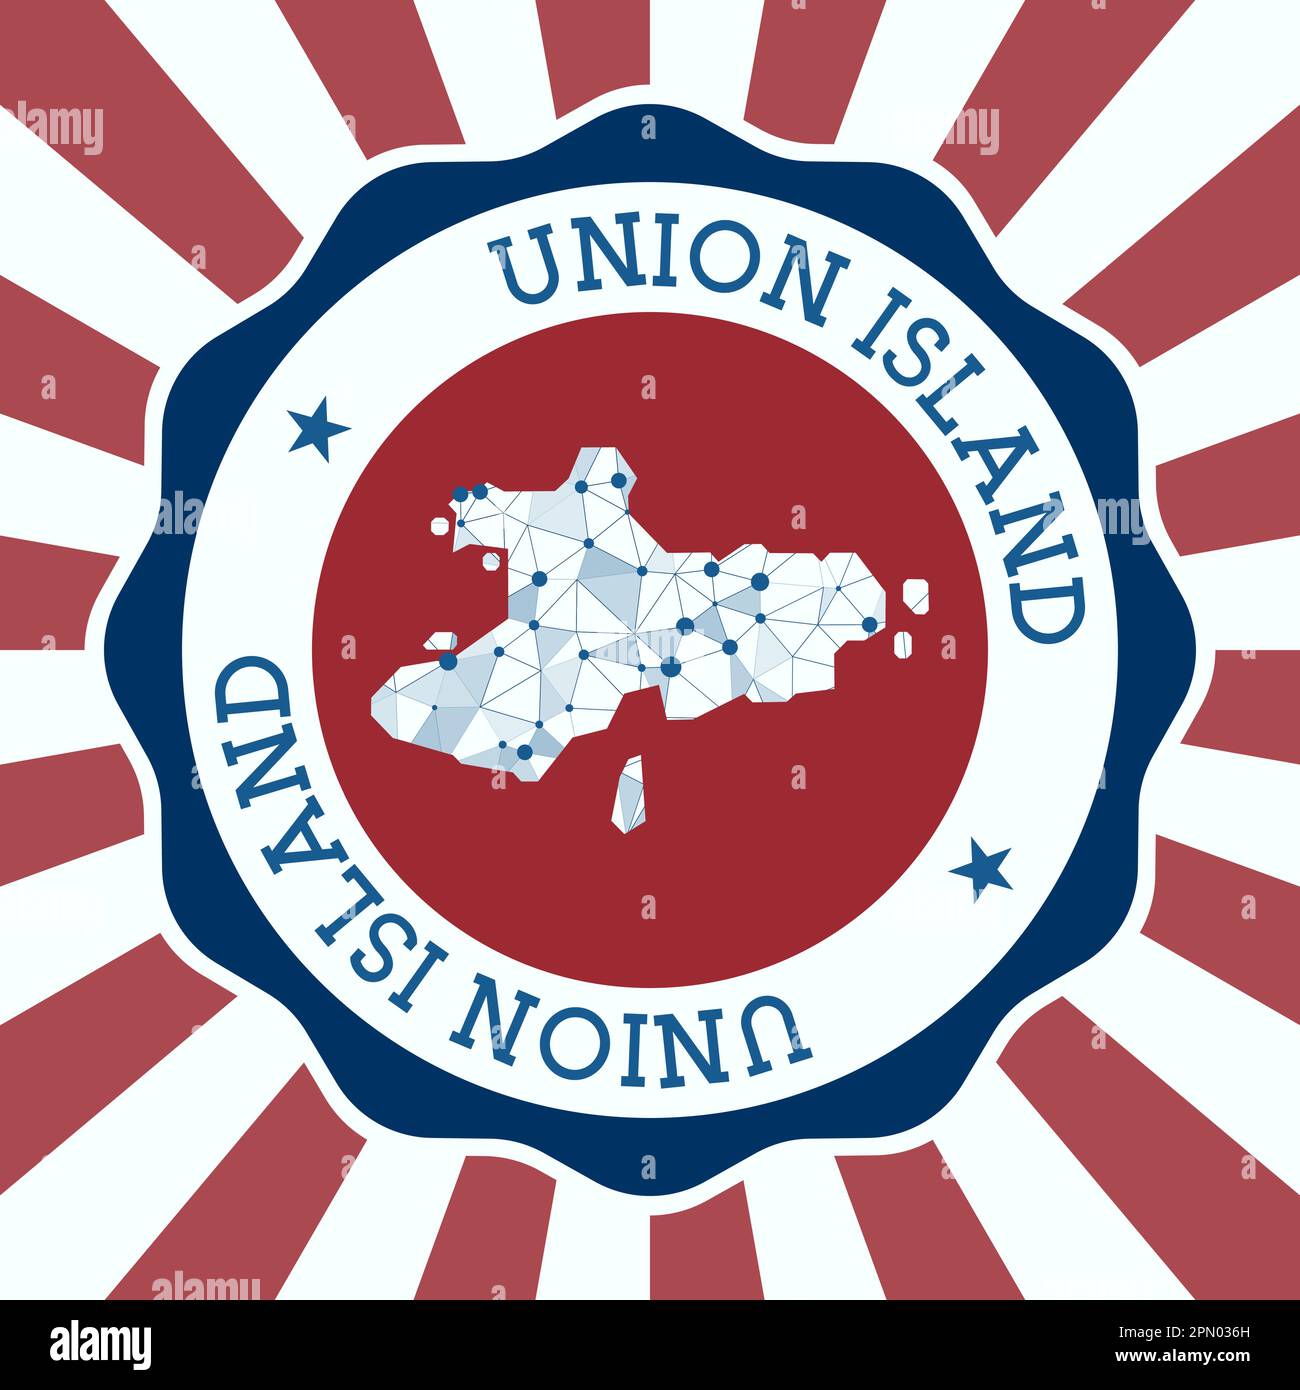 Union Island Badge. Round logo of island with triangular mesh map and radial rays. EPS10 Vector. Stock Vector